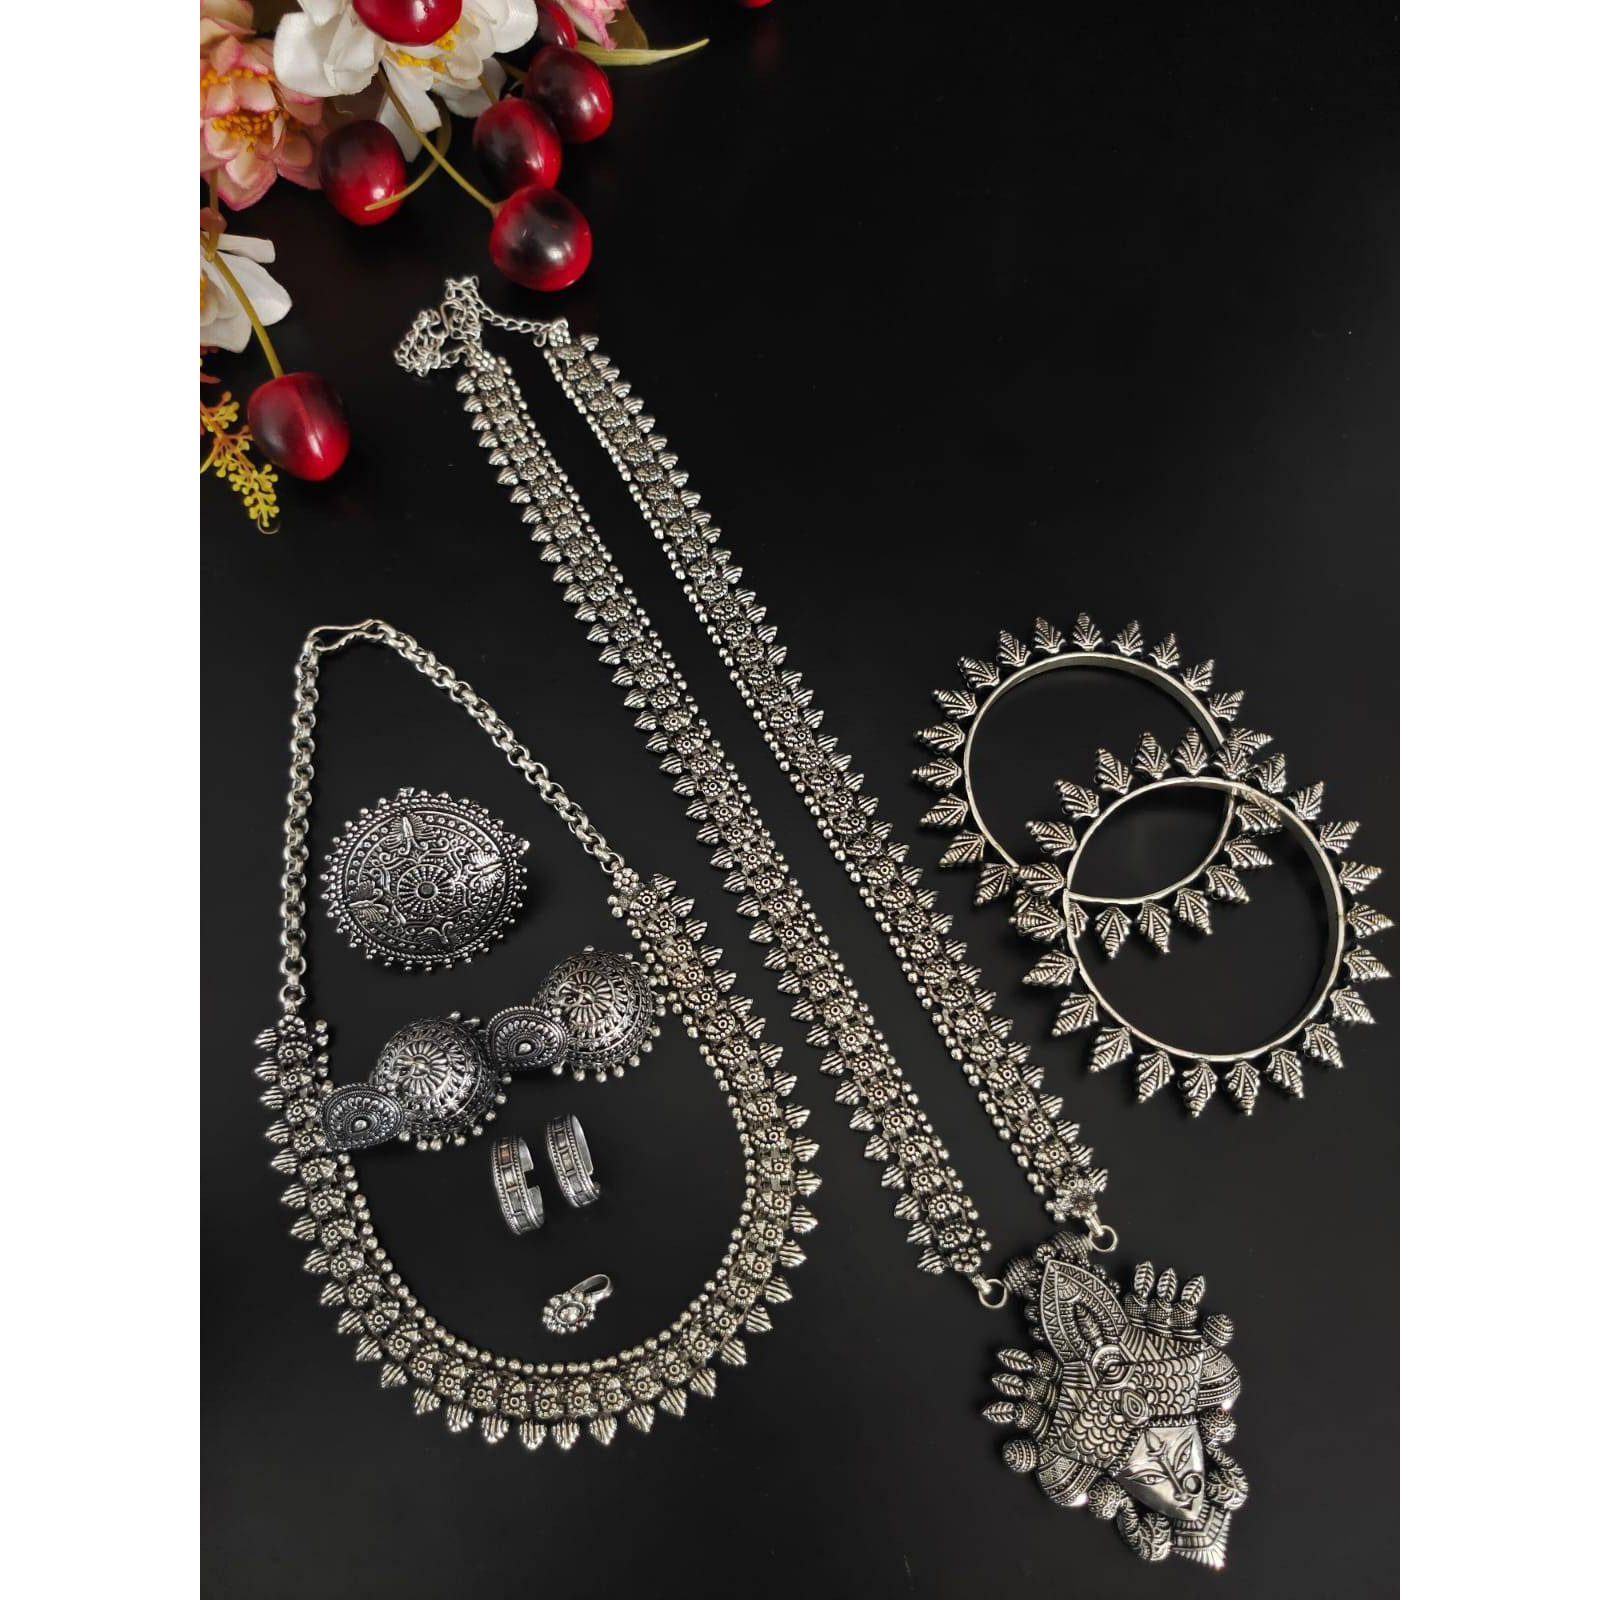 Ethnic Oxidised Silver Choker Set, Antique Oxidized Indian Choker set, Indian Jhumka, Big Jhumki with Choker, Elegant & Trendy NecklaceThis is a perfect example of subtle beauty with a loud personality. With a pinch of modernity with a choker pattern, this ethnic oxidized beauty is a must-have! So, if you are looking to step up your ethnic look by a notch, this set is perfect. This choker set will give you a contrasting yet interesting personality and confidence! So, roll the heads over you with